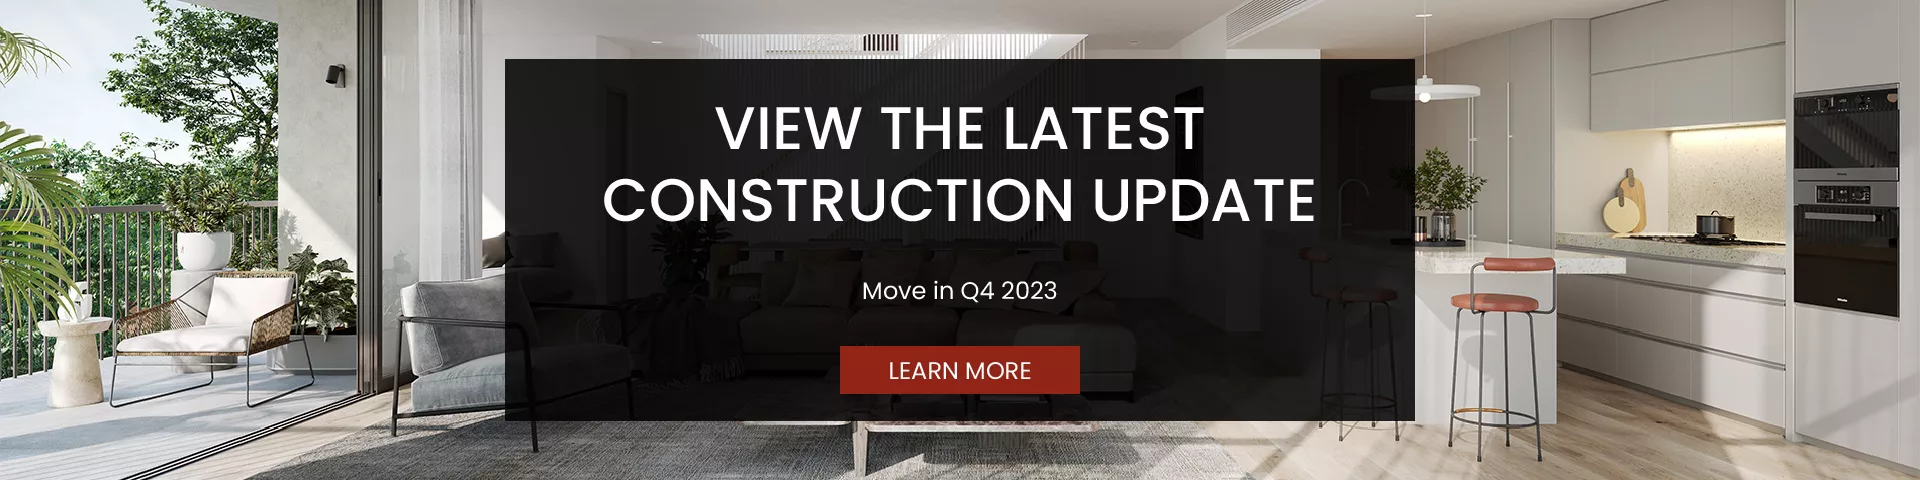 Gramercy Terraces click to read latest construction updates banner